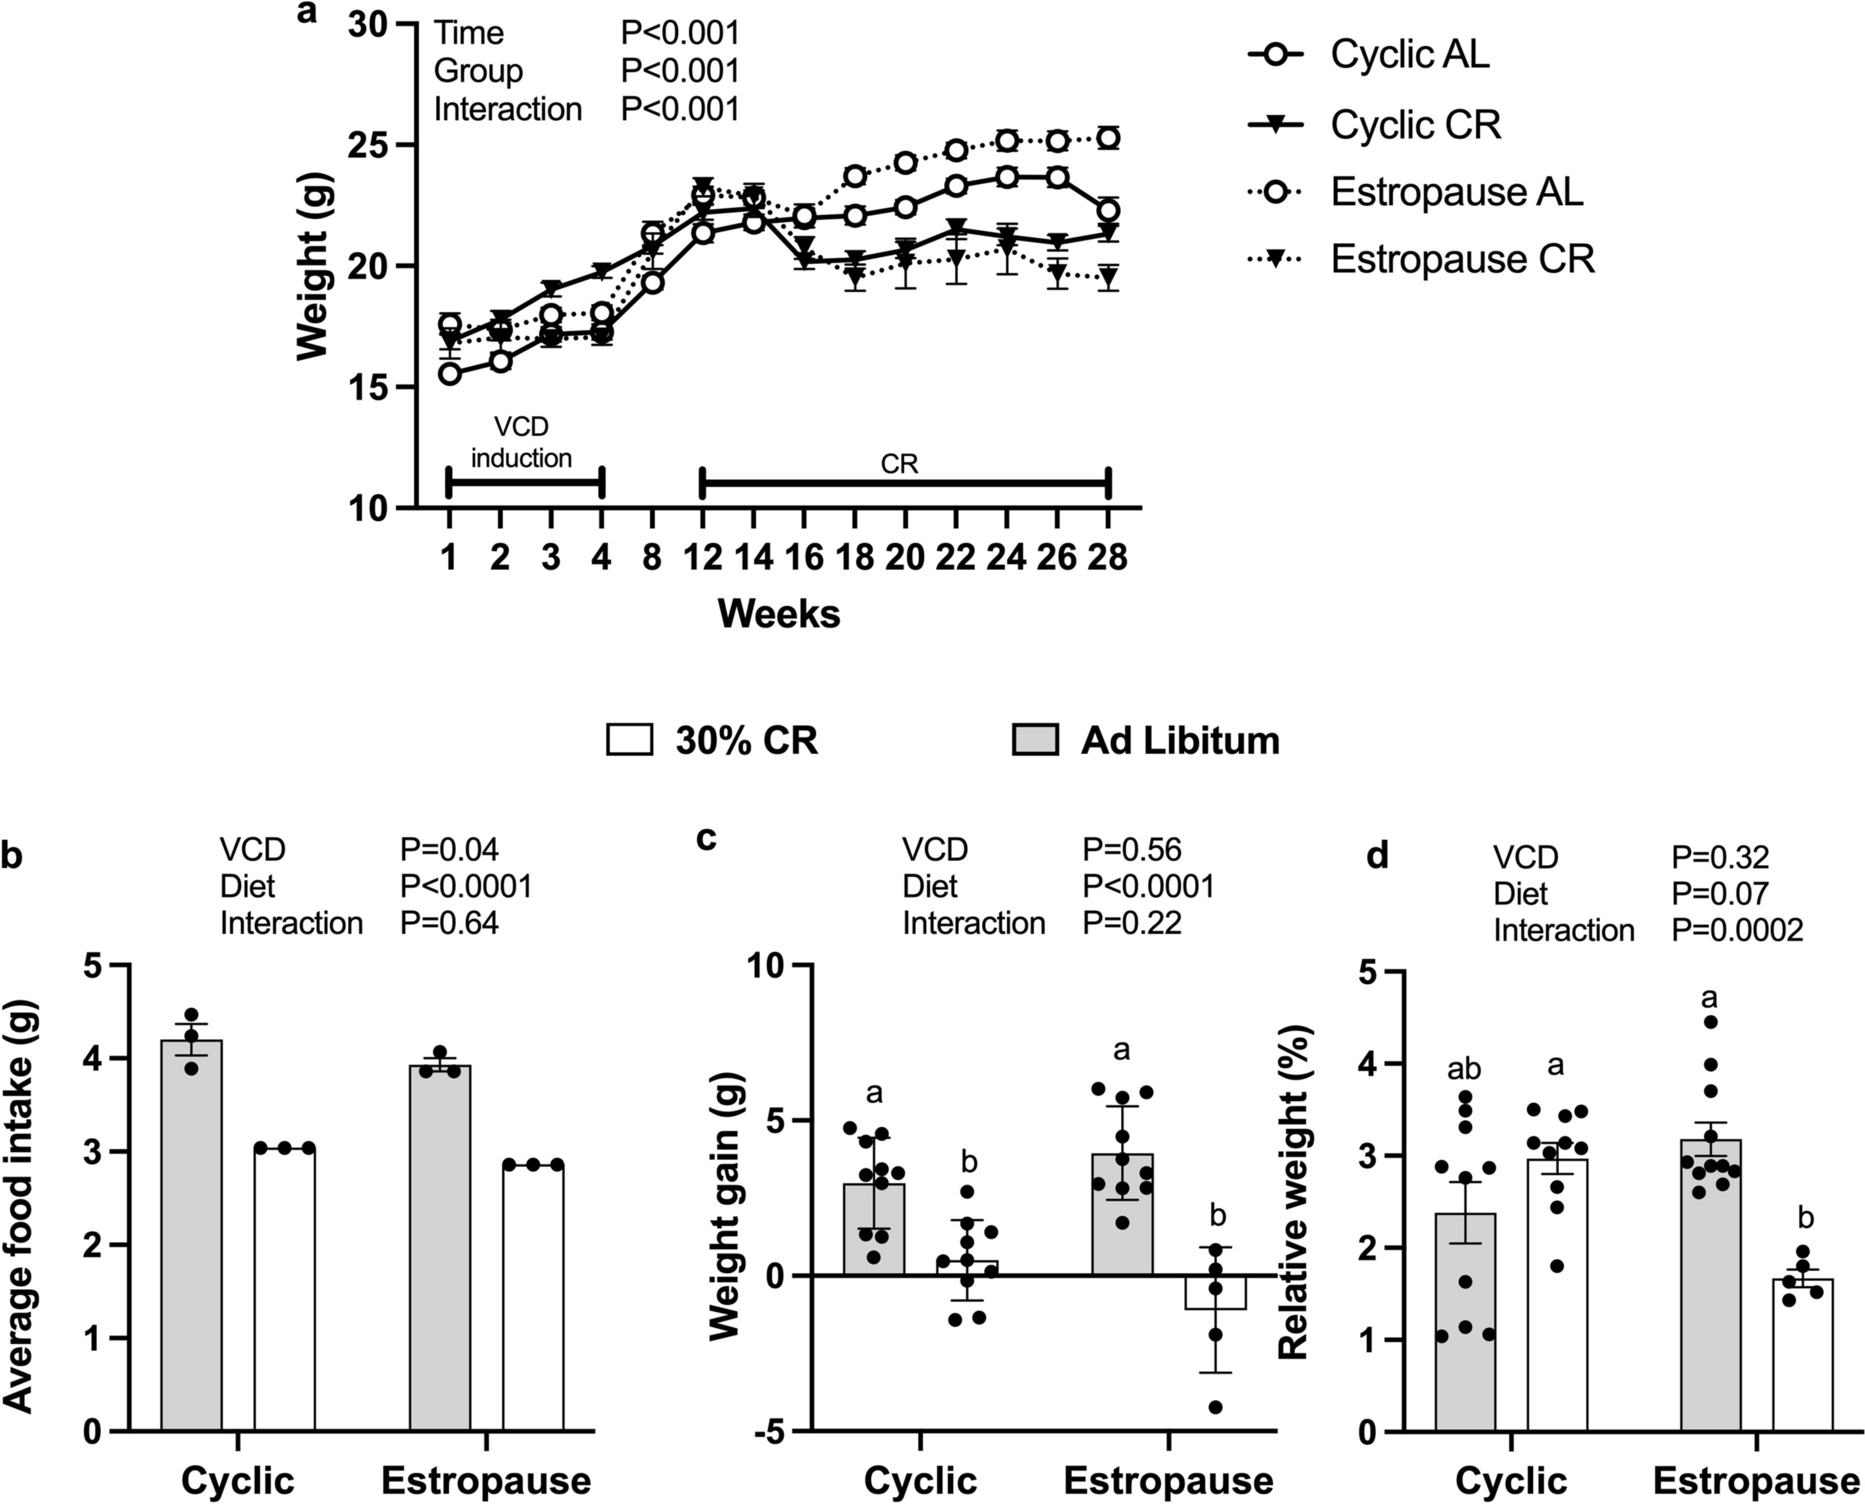 Effect of calorie restriction on redox status during chemically induced estropause in female mice